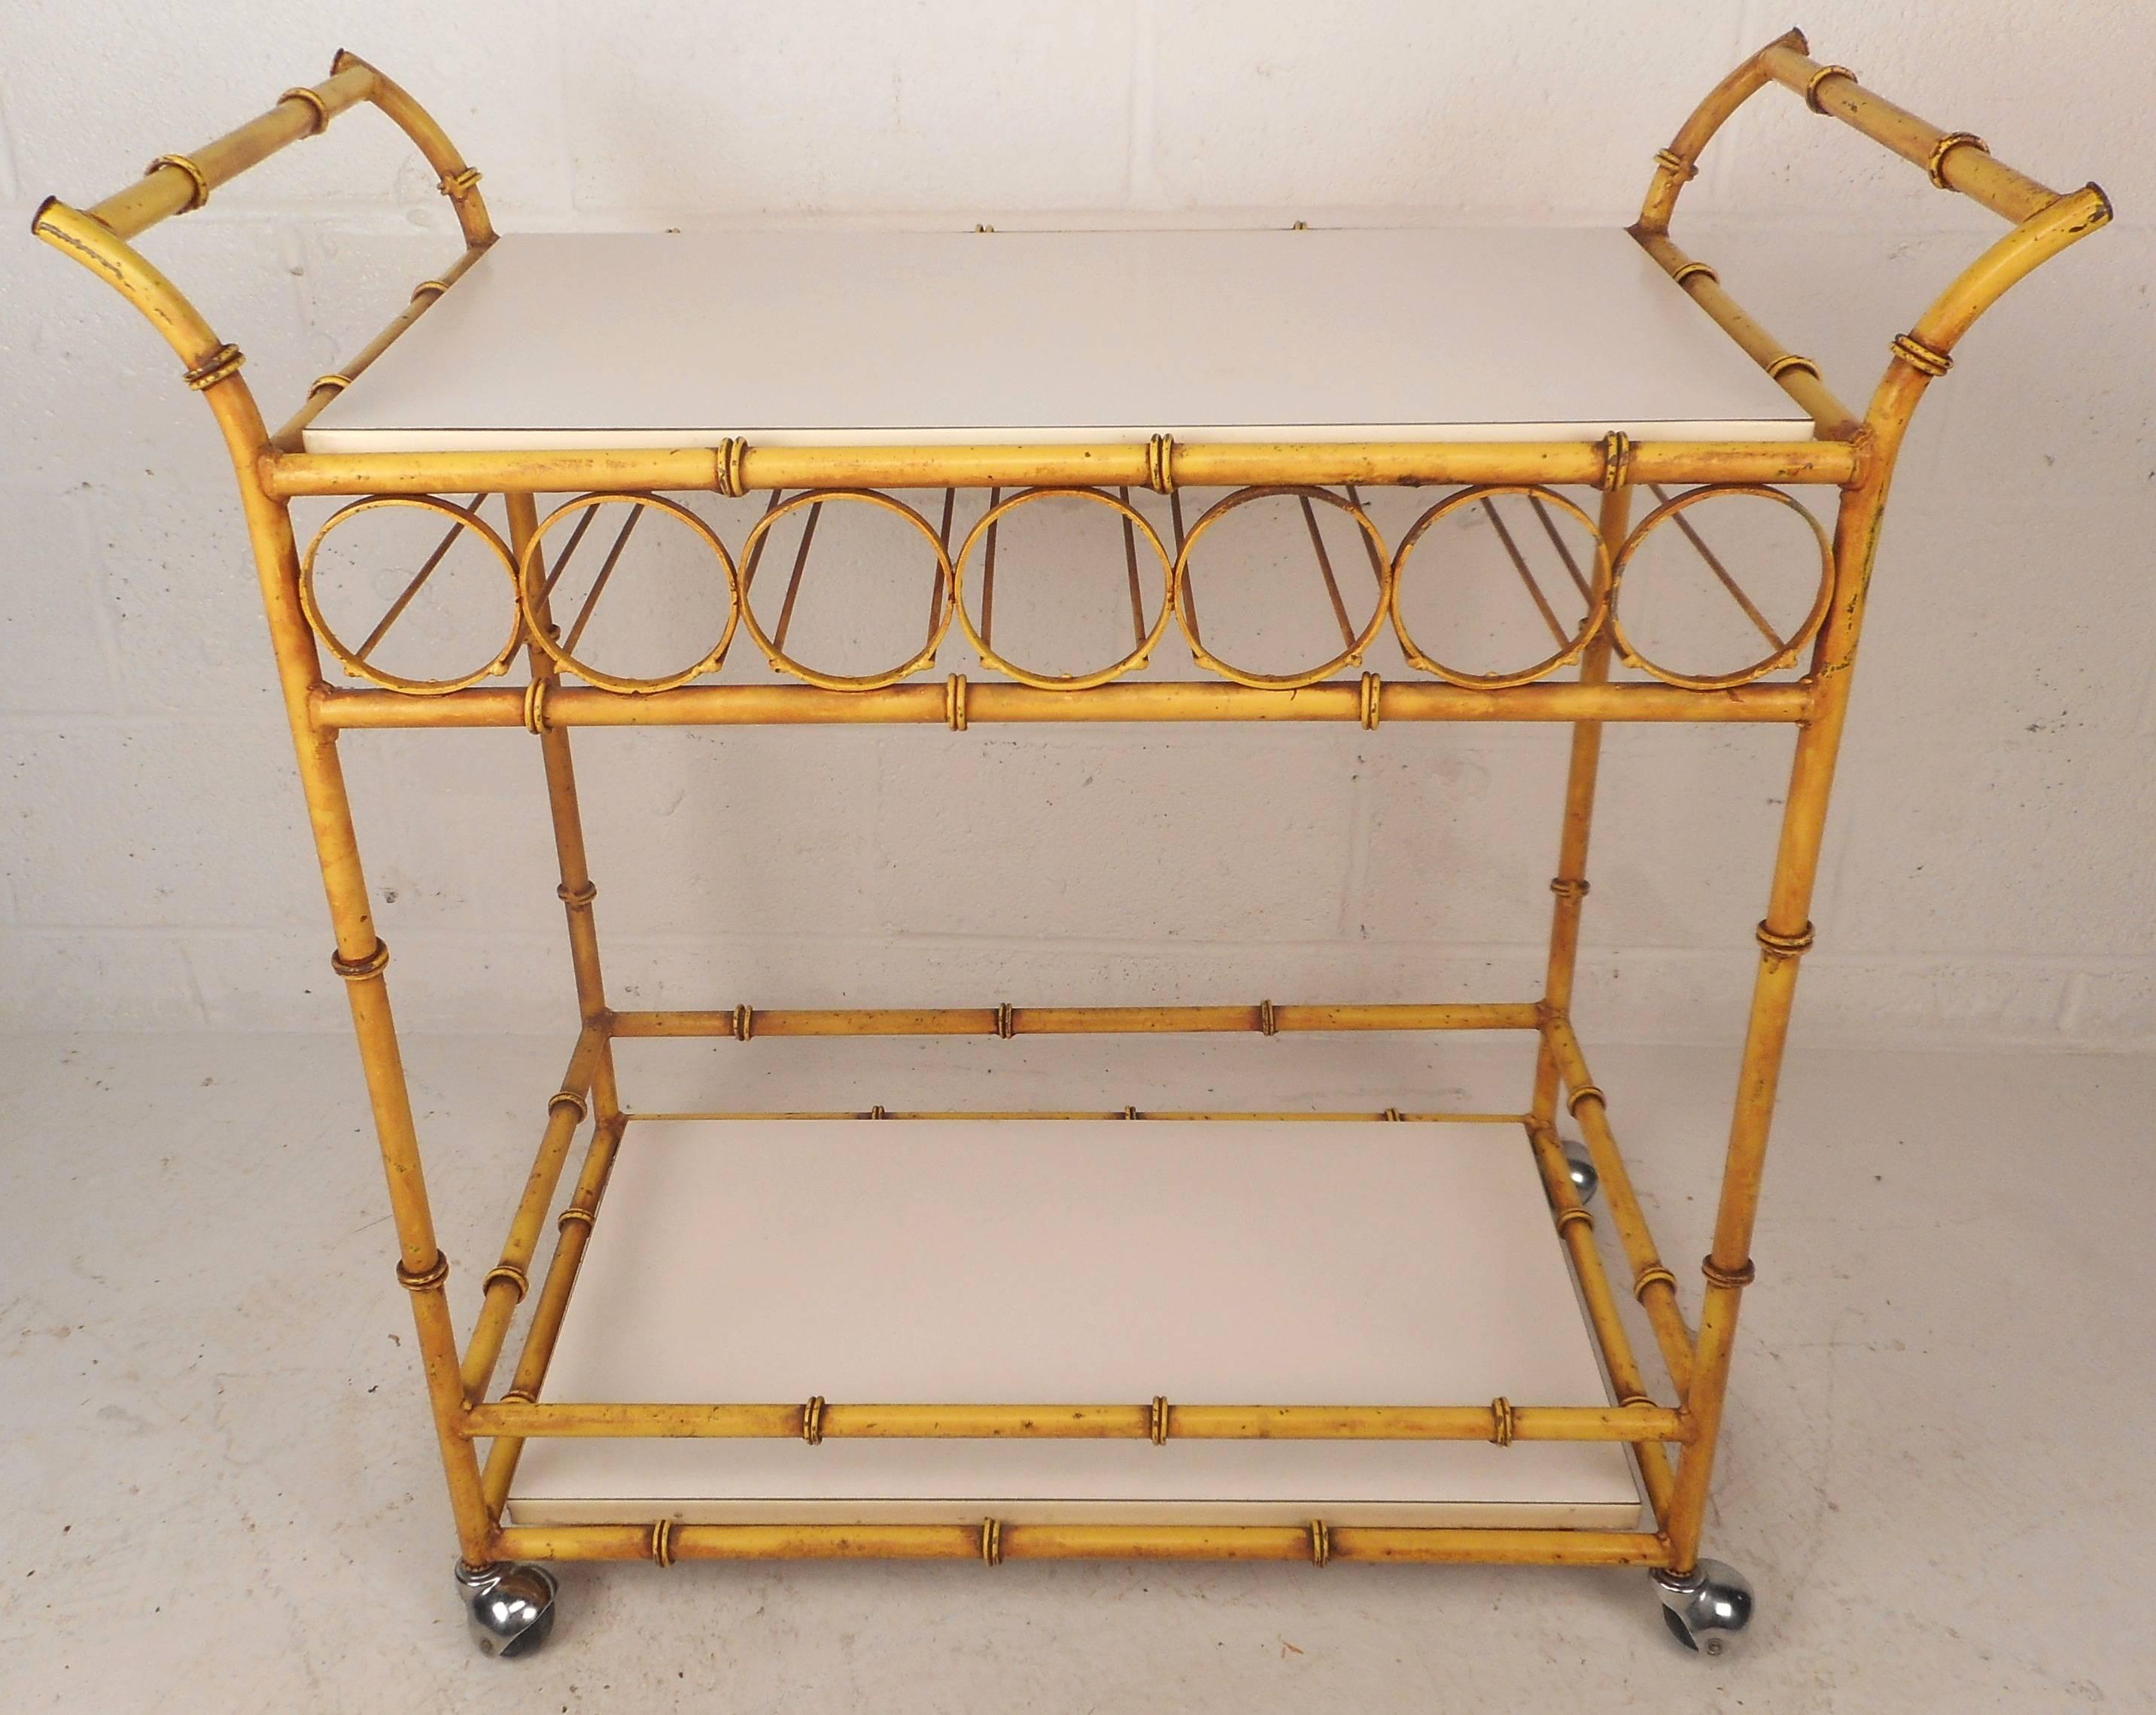 Beautiful vintage modern bar cart with two white laminate shelves and a yellow painted iron faux bamboo frame. Unique design features a smaller compartment underneath the top with thin rods. Gorgeous circular detail runs along each side making this